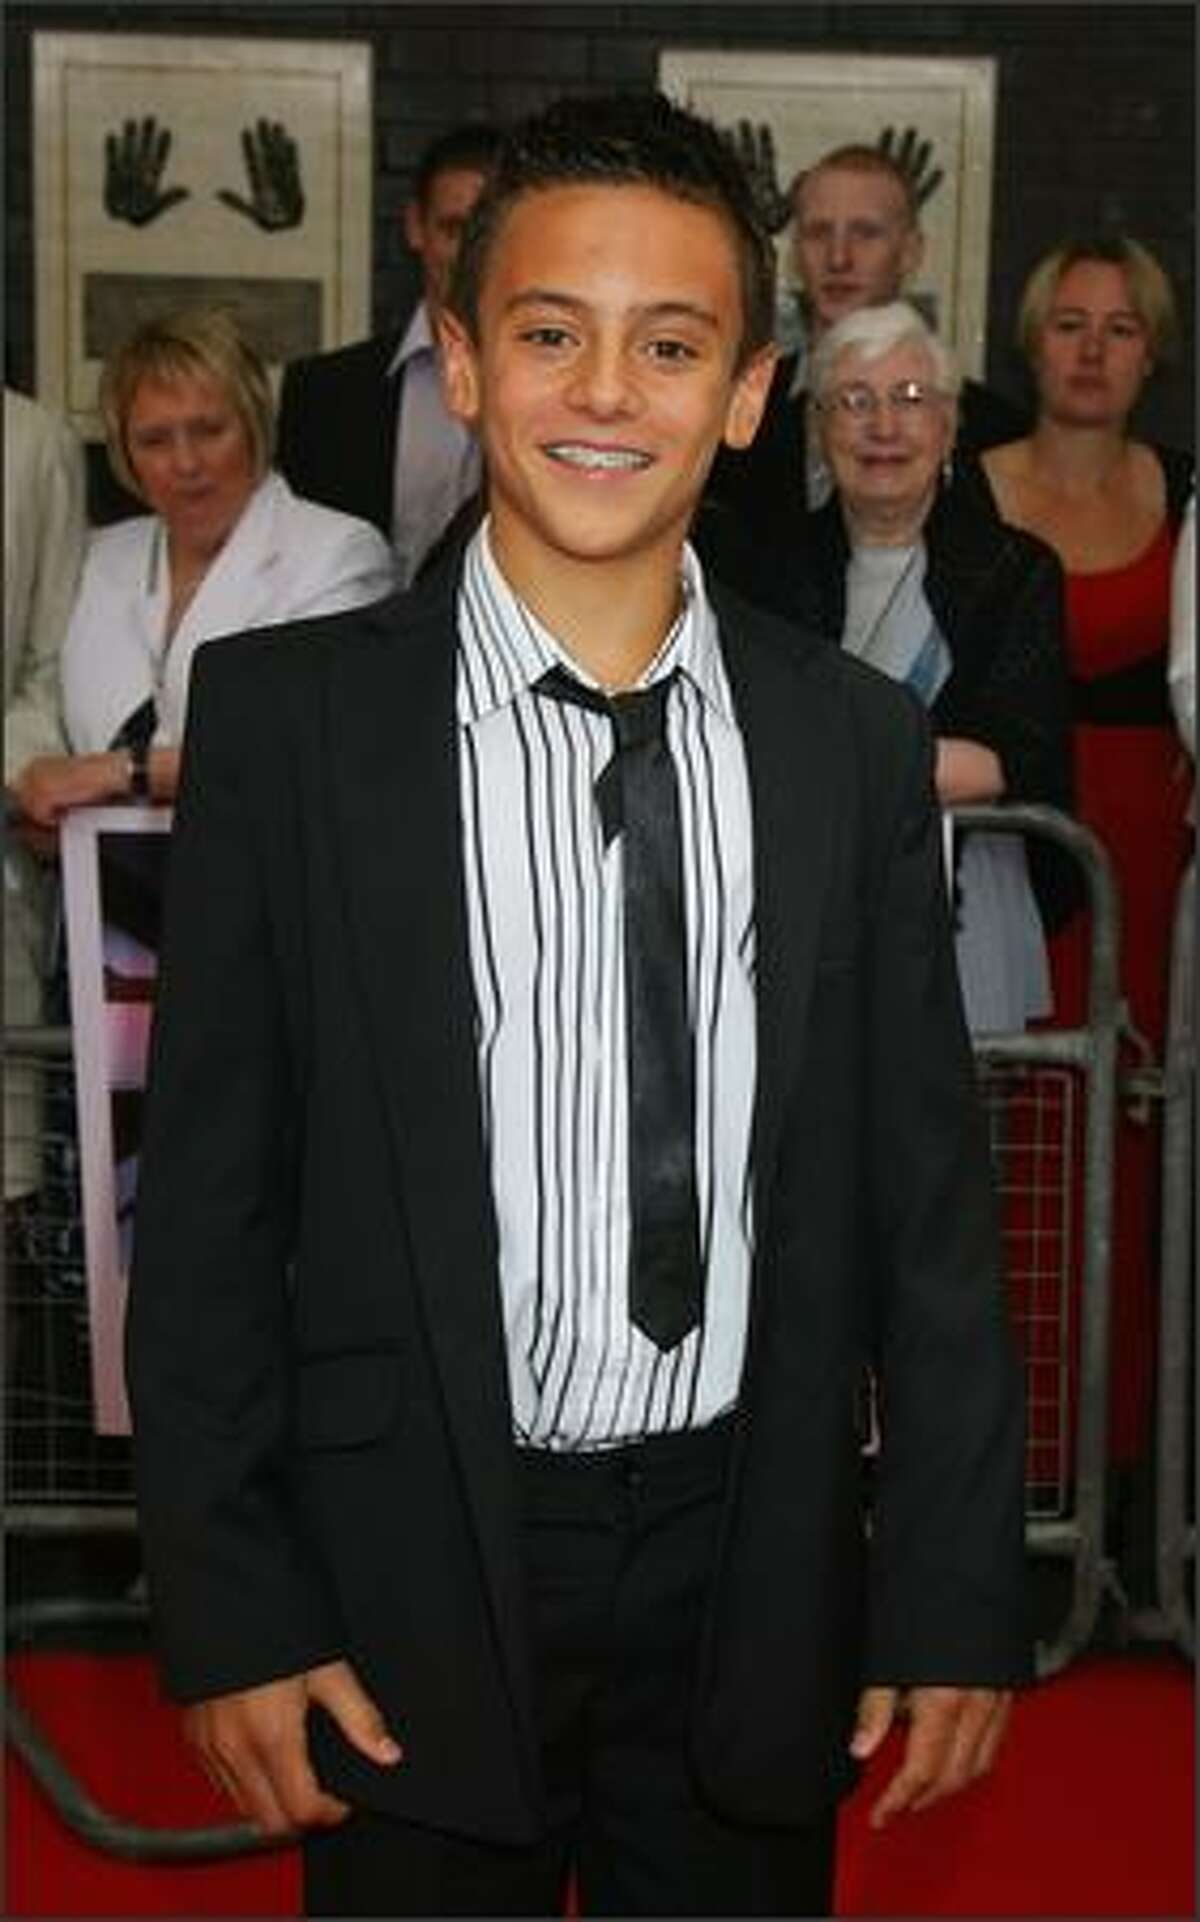 British Olympic diver Tom Daley arrives at the Britains Best 2008 awards at The London Studios in London, England.